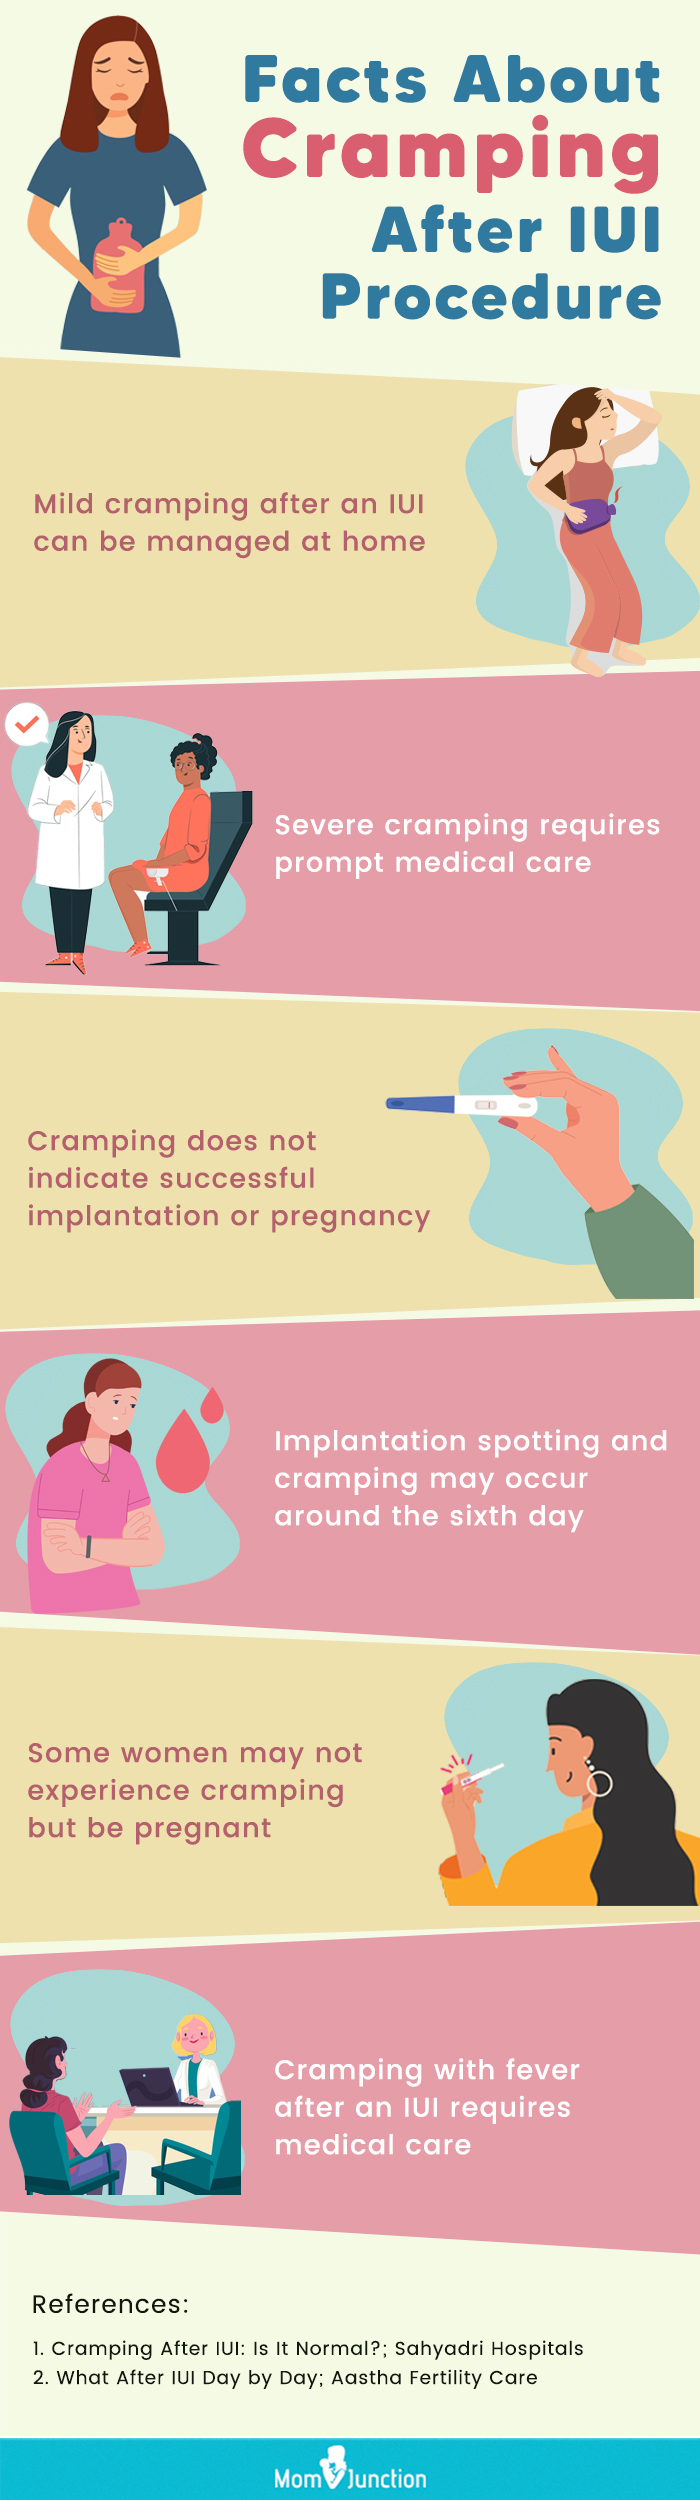 facts about cramping after iui procedure (infographic)